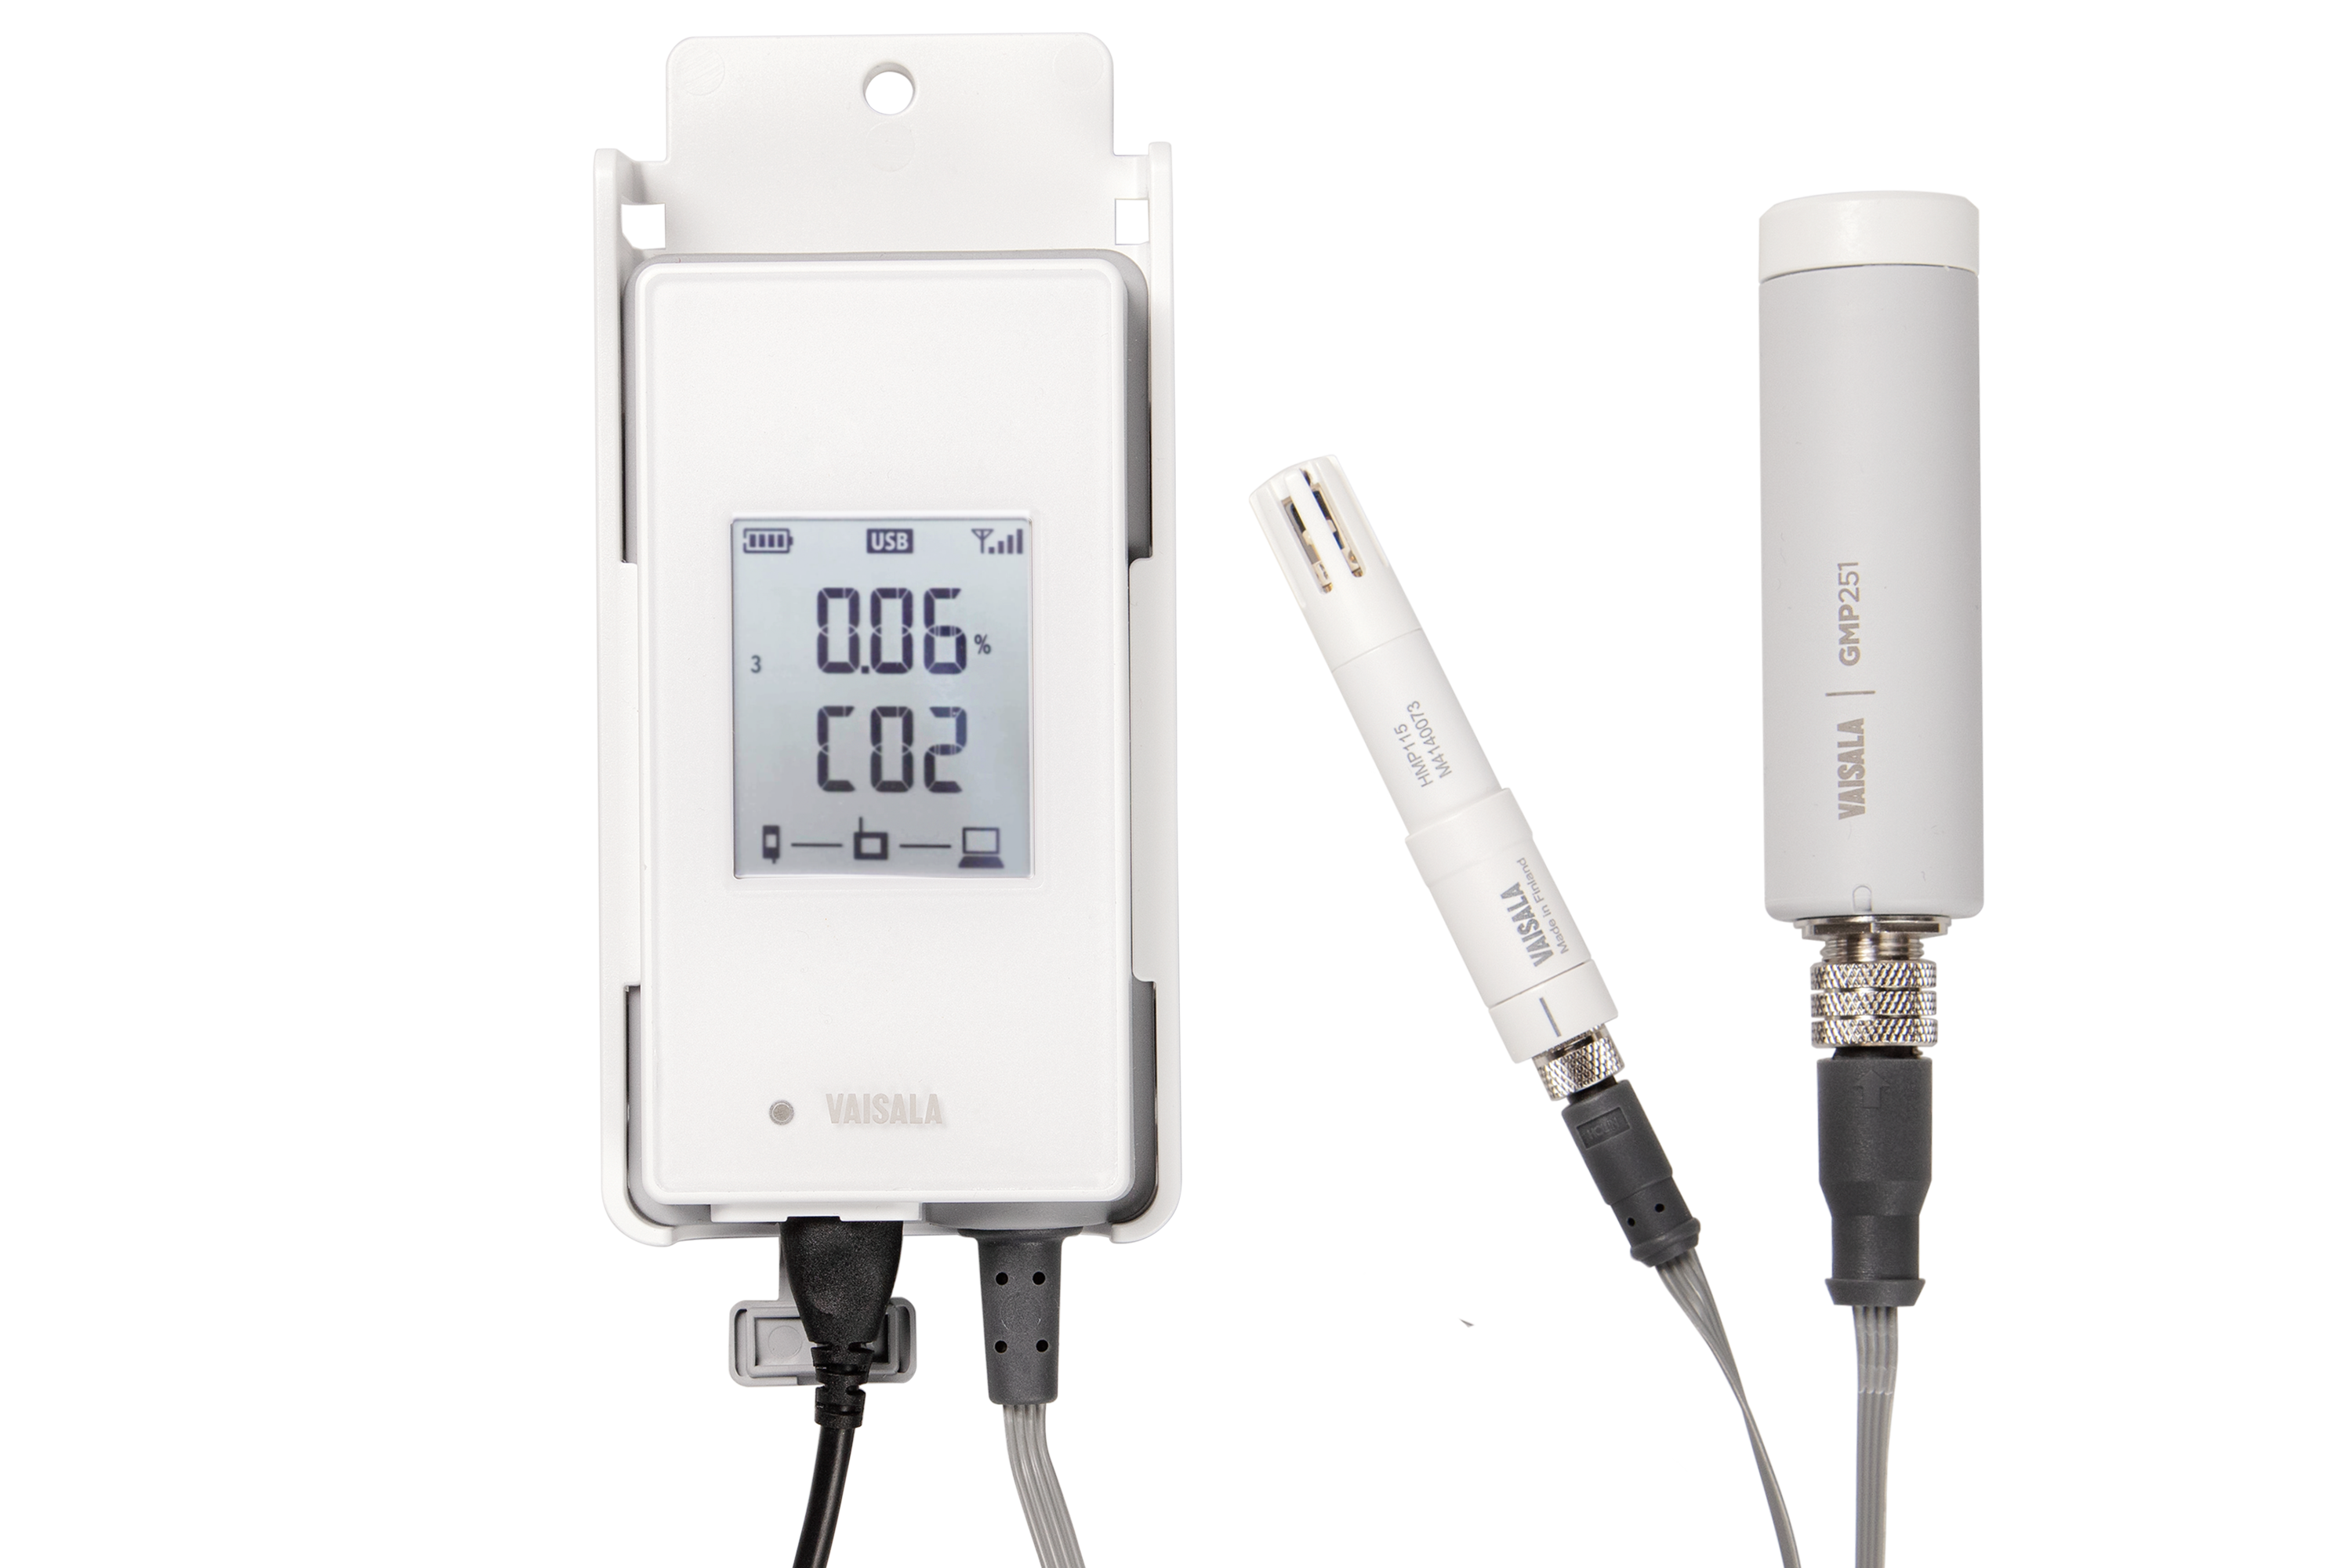 VaiNet wireless CO2 data logger RFL100 is available at Industrie Automation Graz, IAG, throughout Austria.